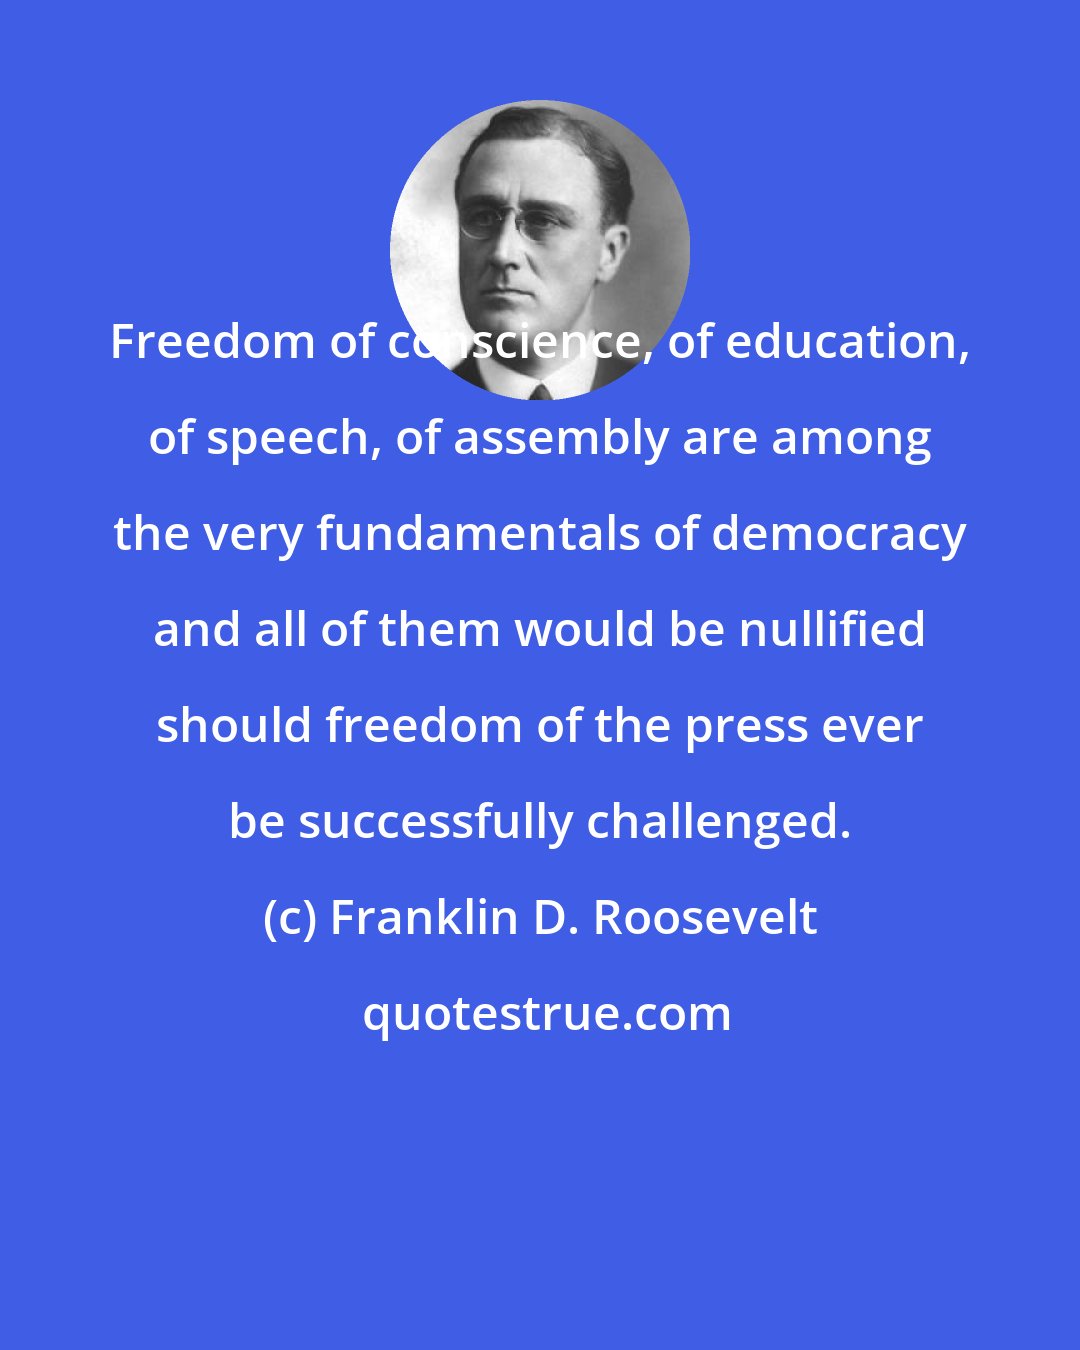 Franklin D. Roosevelt: Freedom of conscience, of education, of speech, of assembly are among the very fundamentals of democracy and all of them would be nullified should freedom of the press ever be successfully challenged.